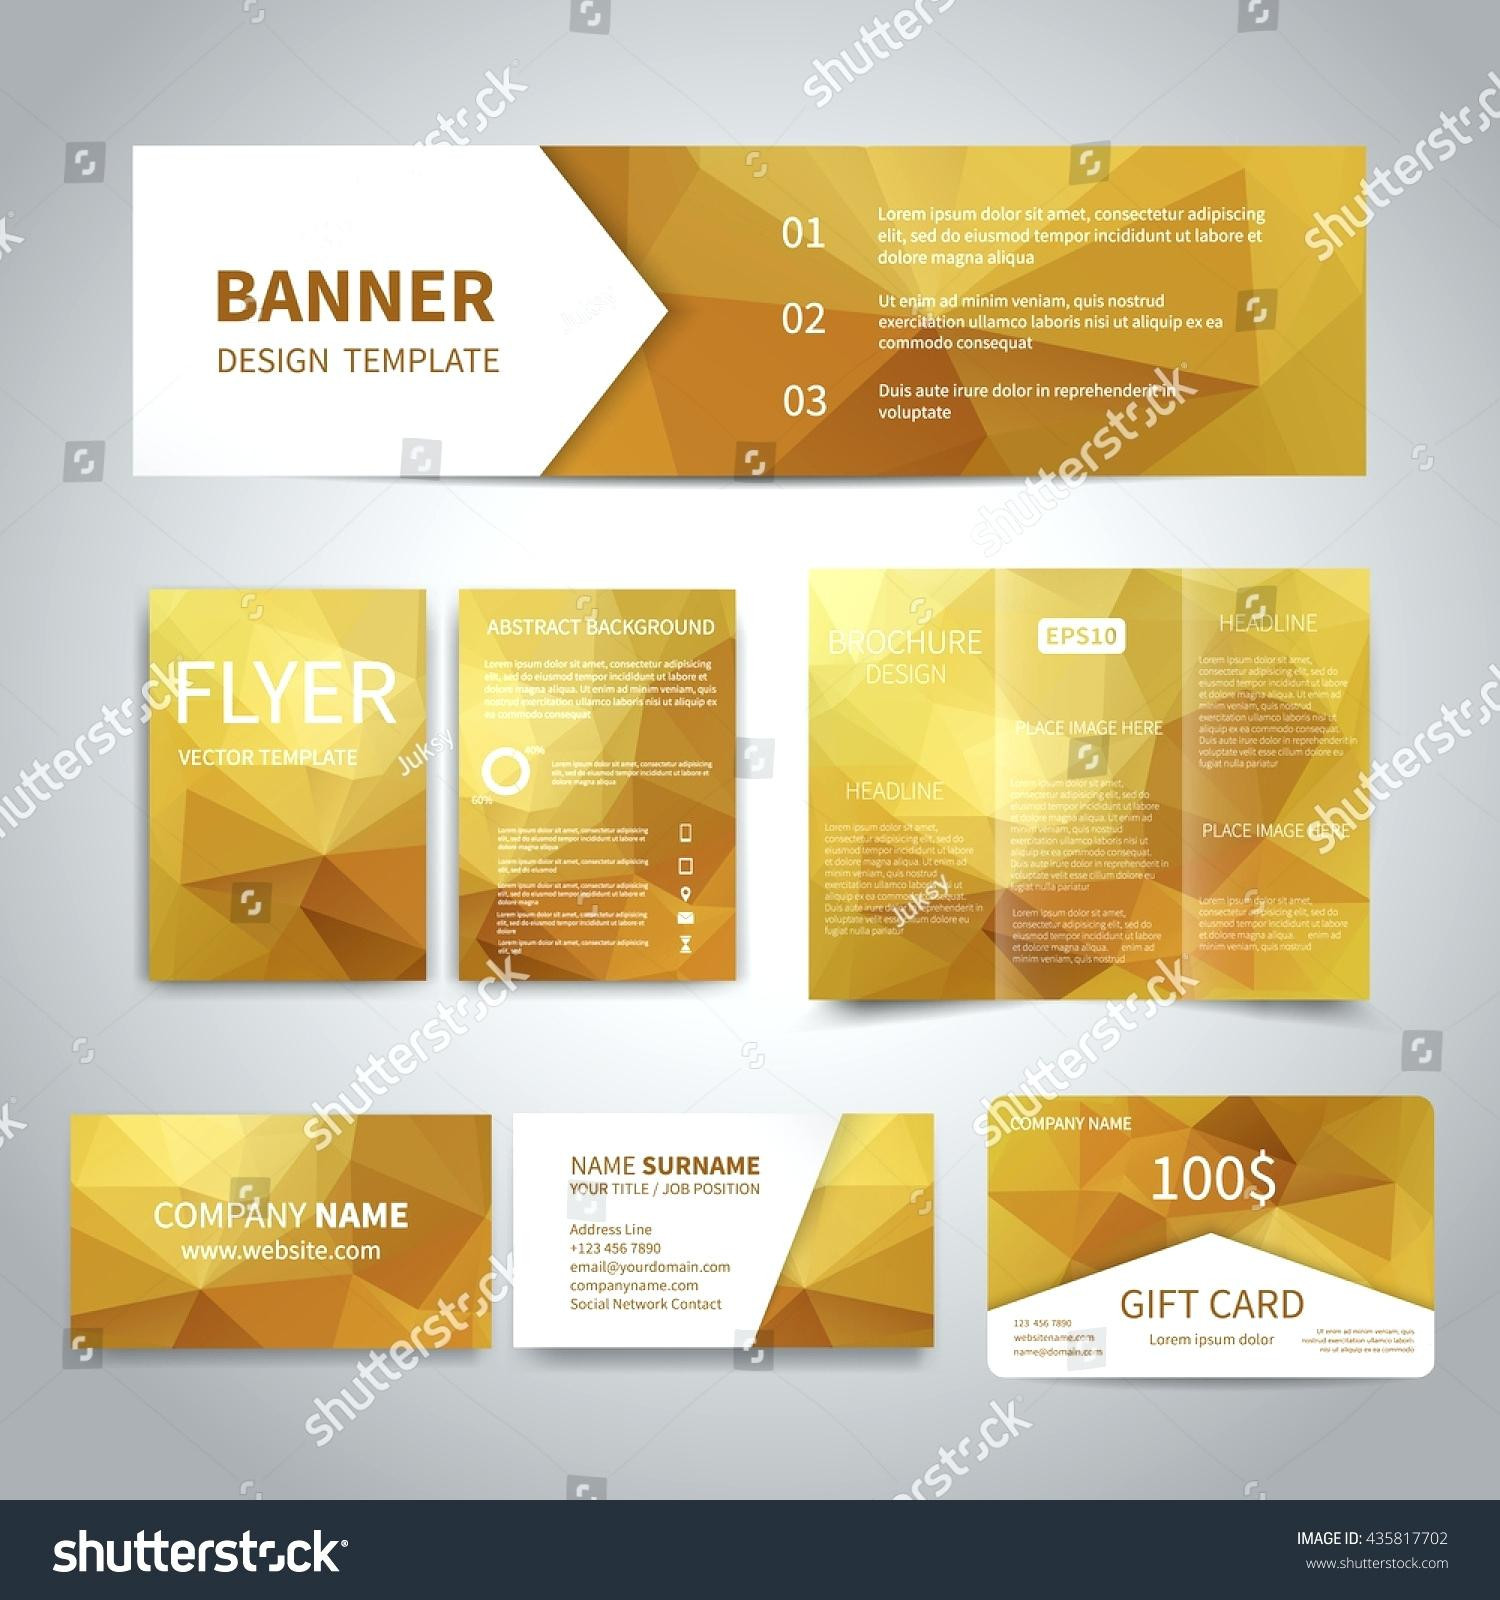 Free Email Invitation Template Luxury Email Invitation Of Free Business Card Template